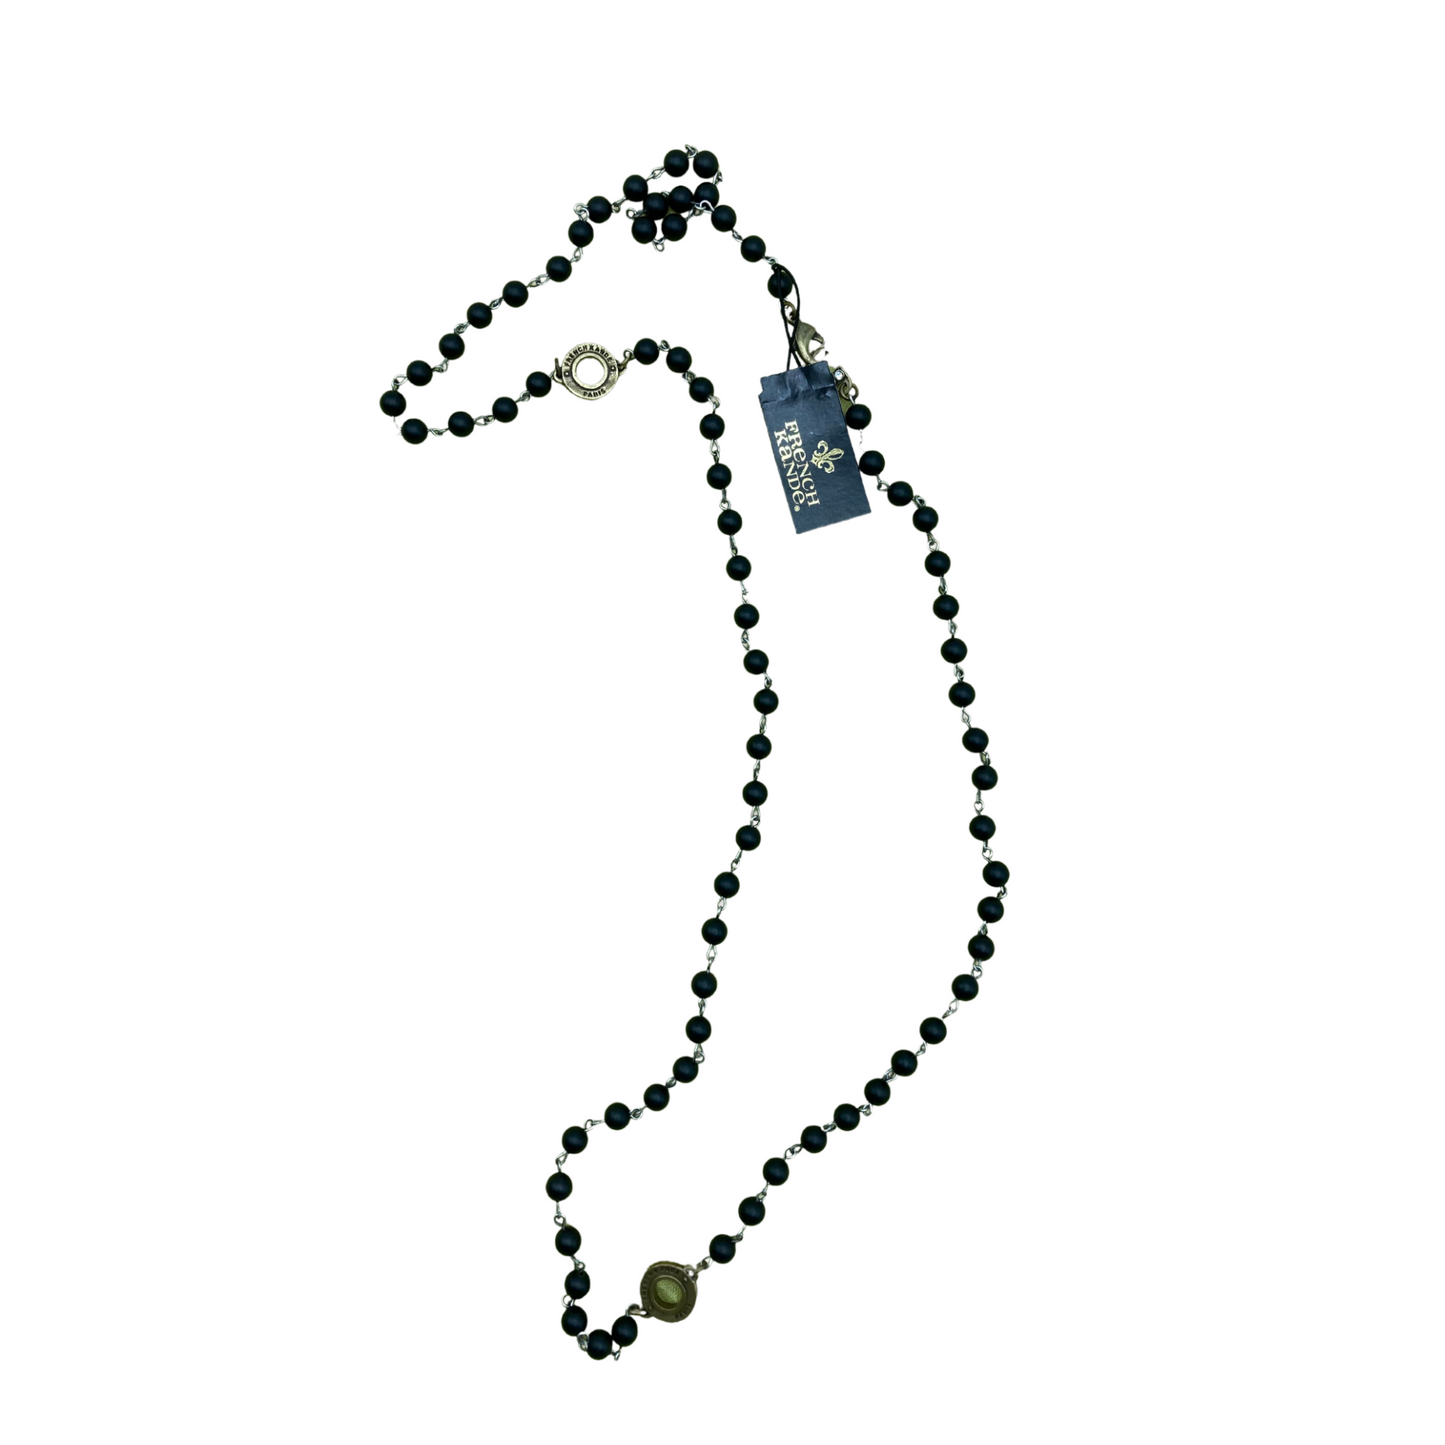 A black, beaded necklace with a silver chain and a small pendant.